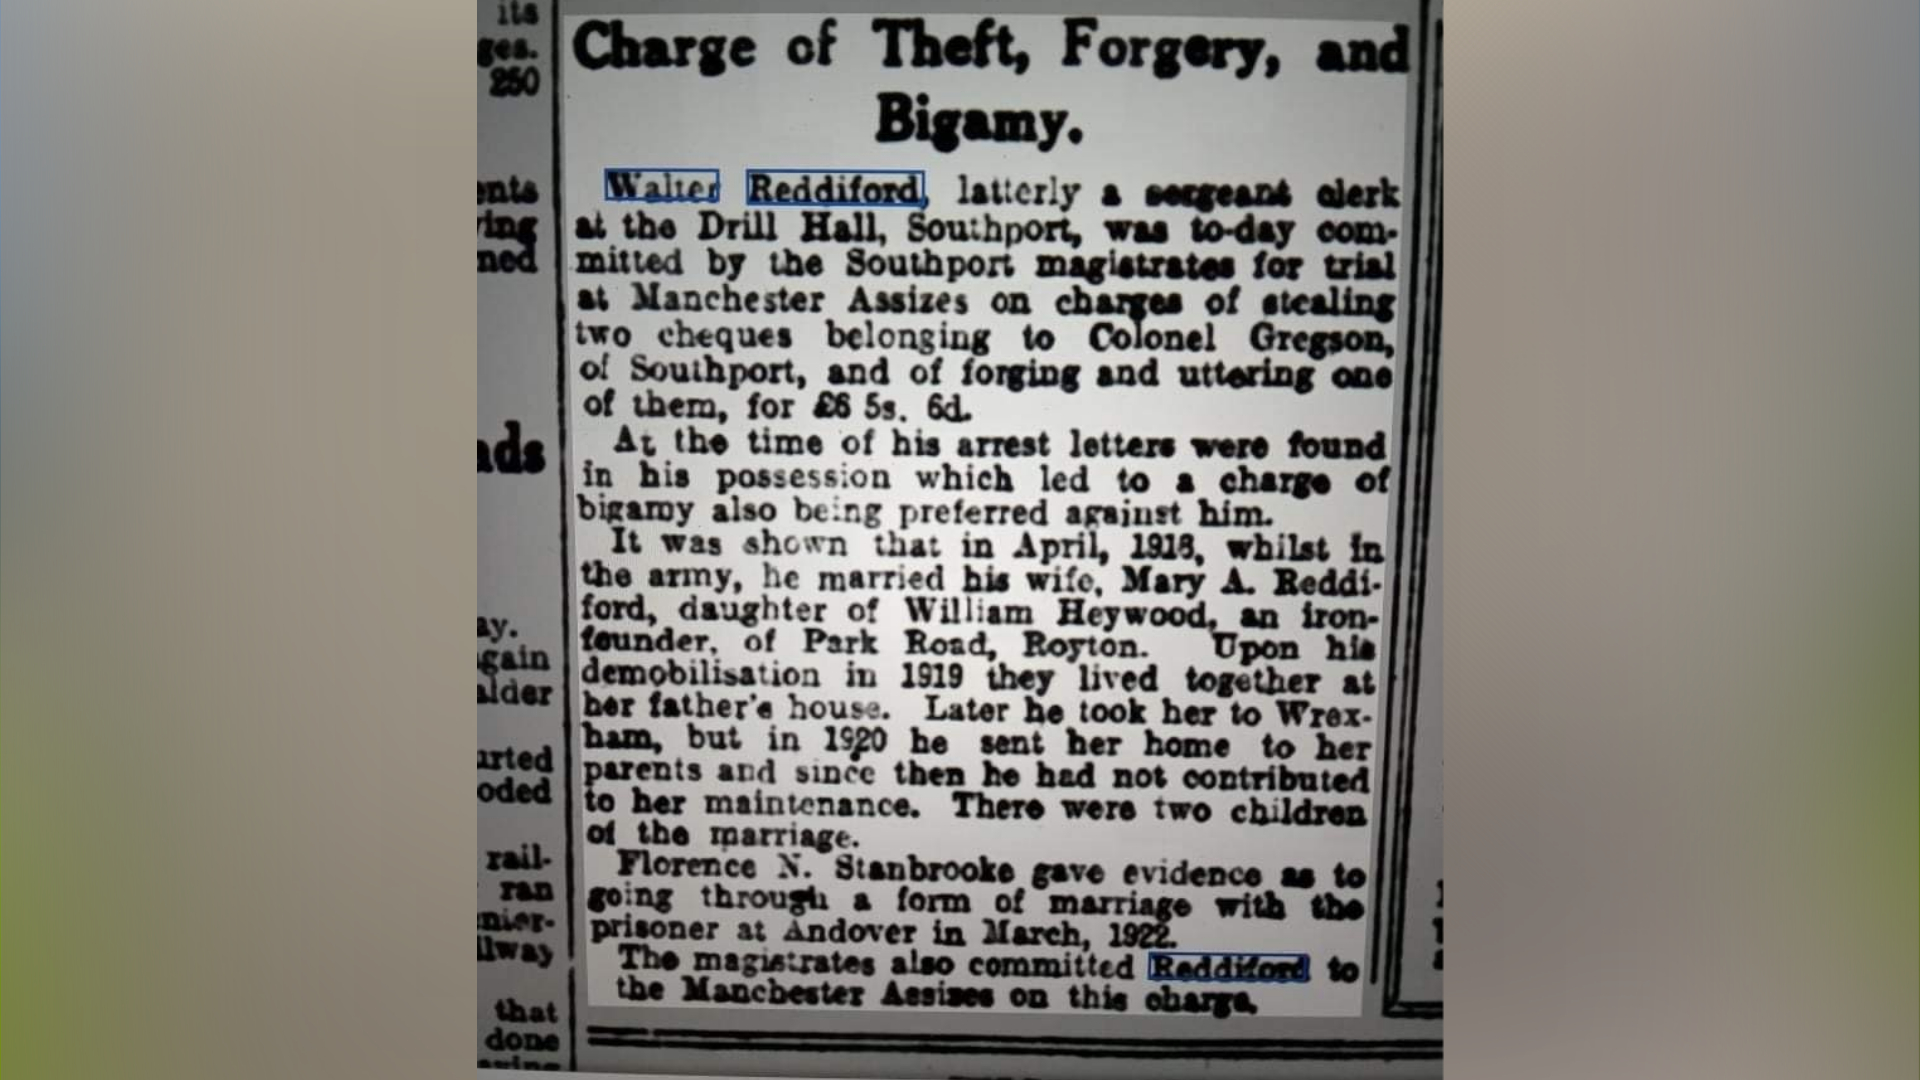 The newspaper clipping on Corporal Reddiford's charges.